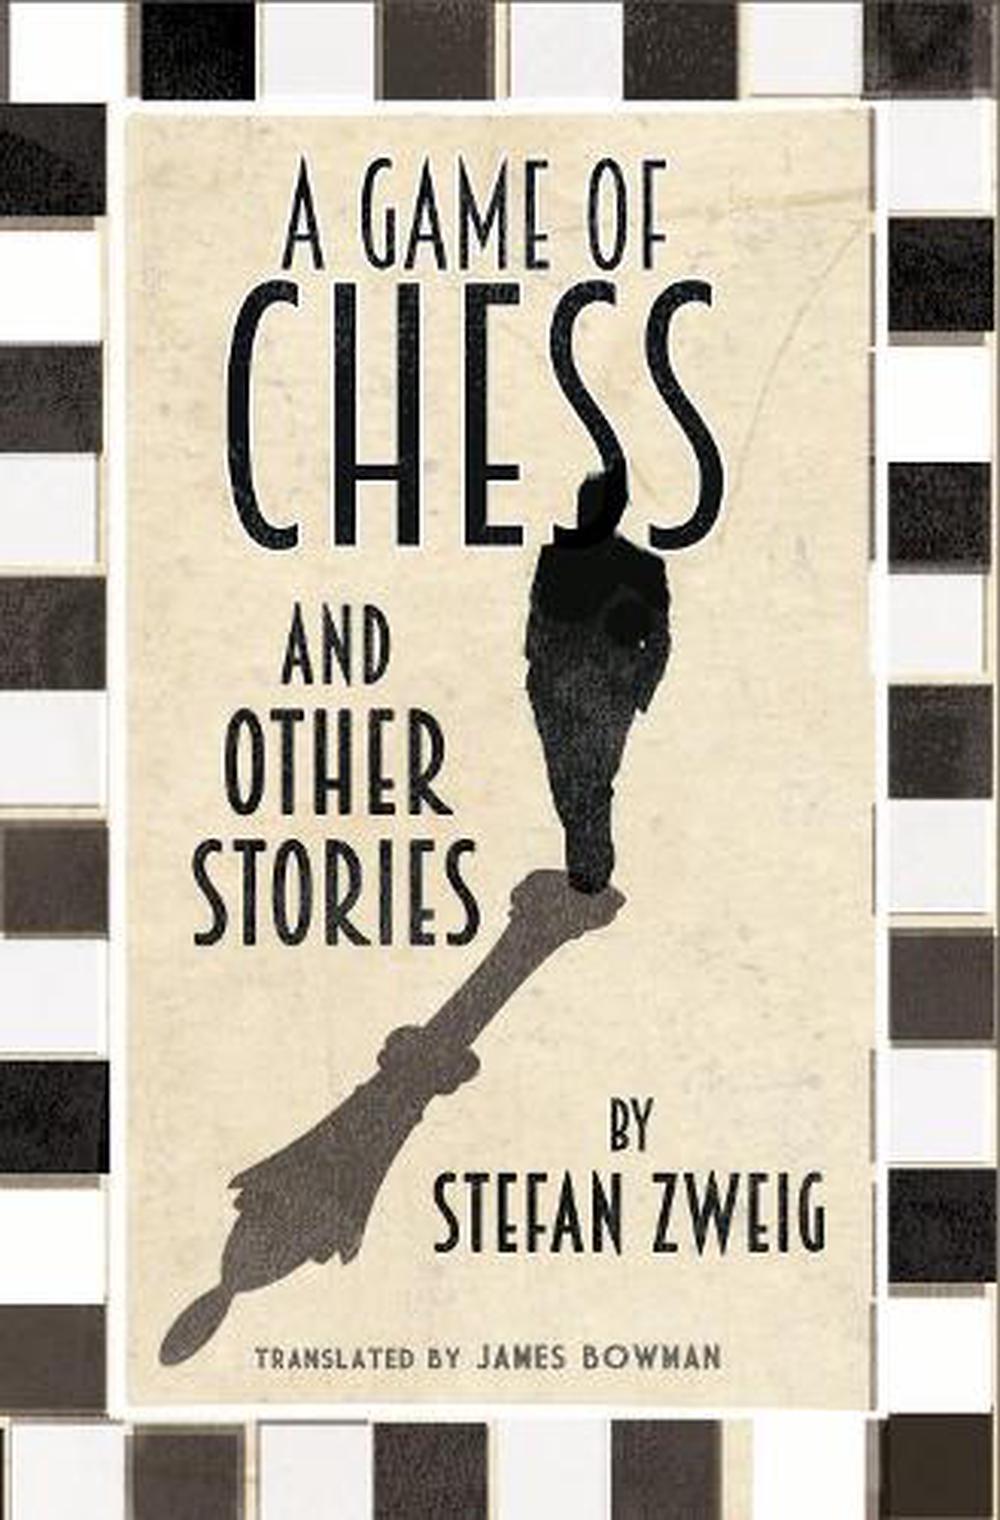 Chess Story by Stefan Zweig